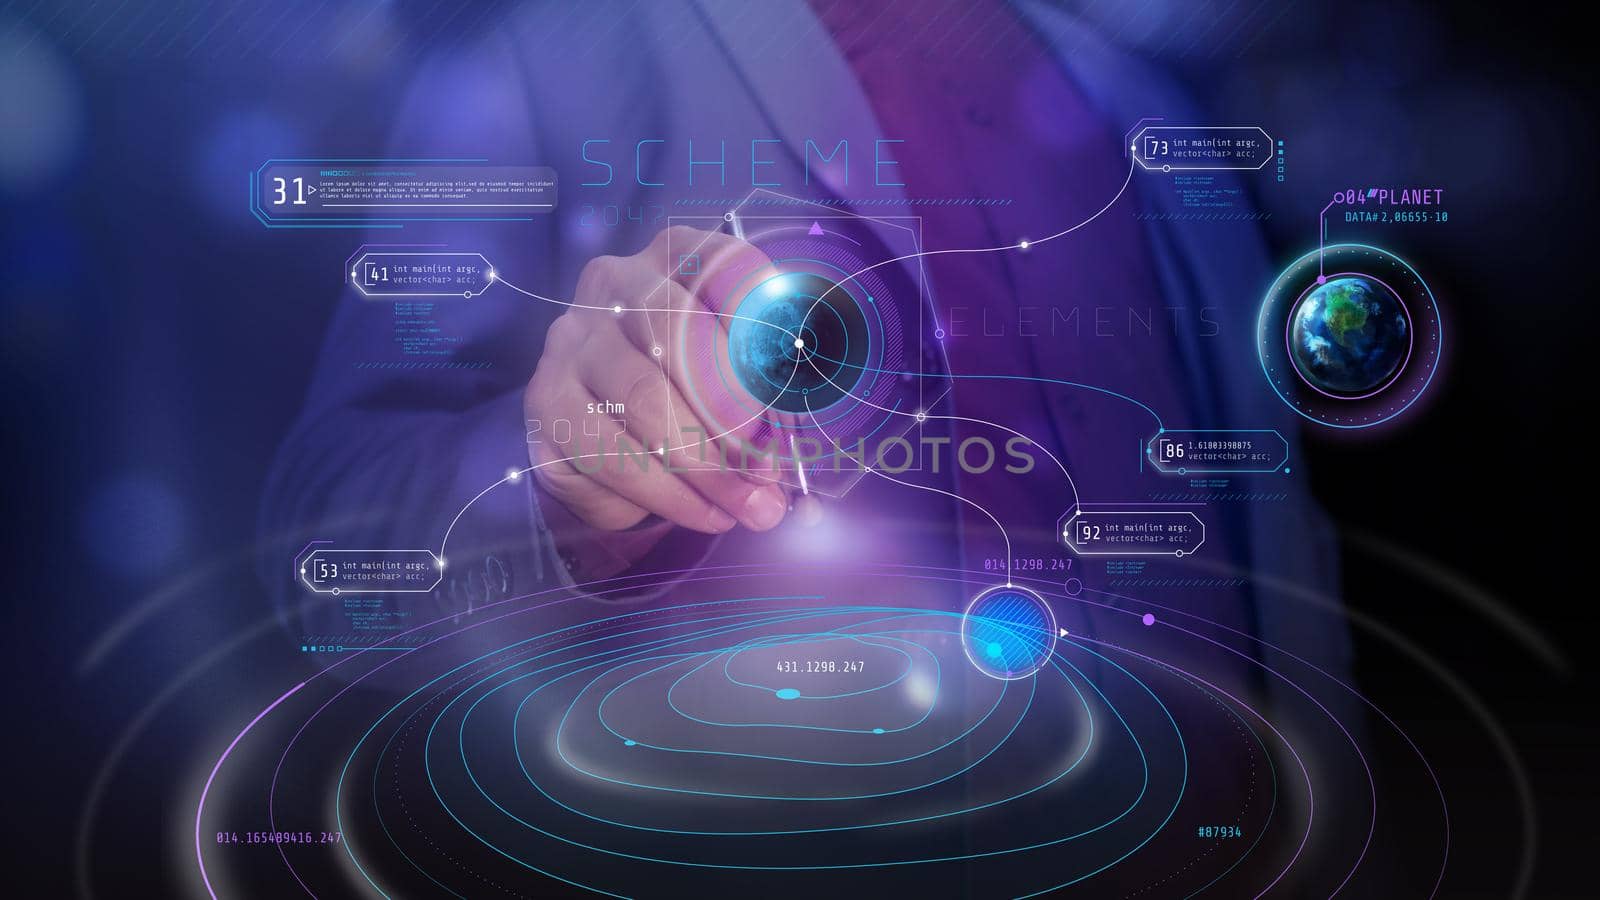 Virtual infographic with planets holograms for background on the Future of Business.